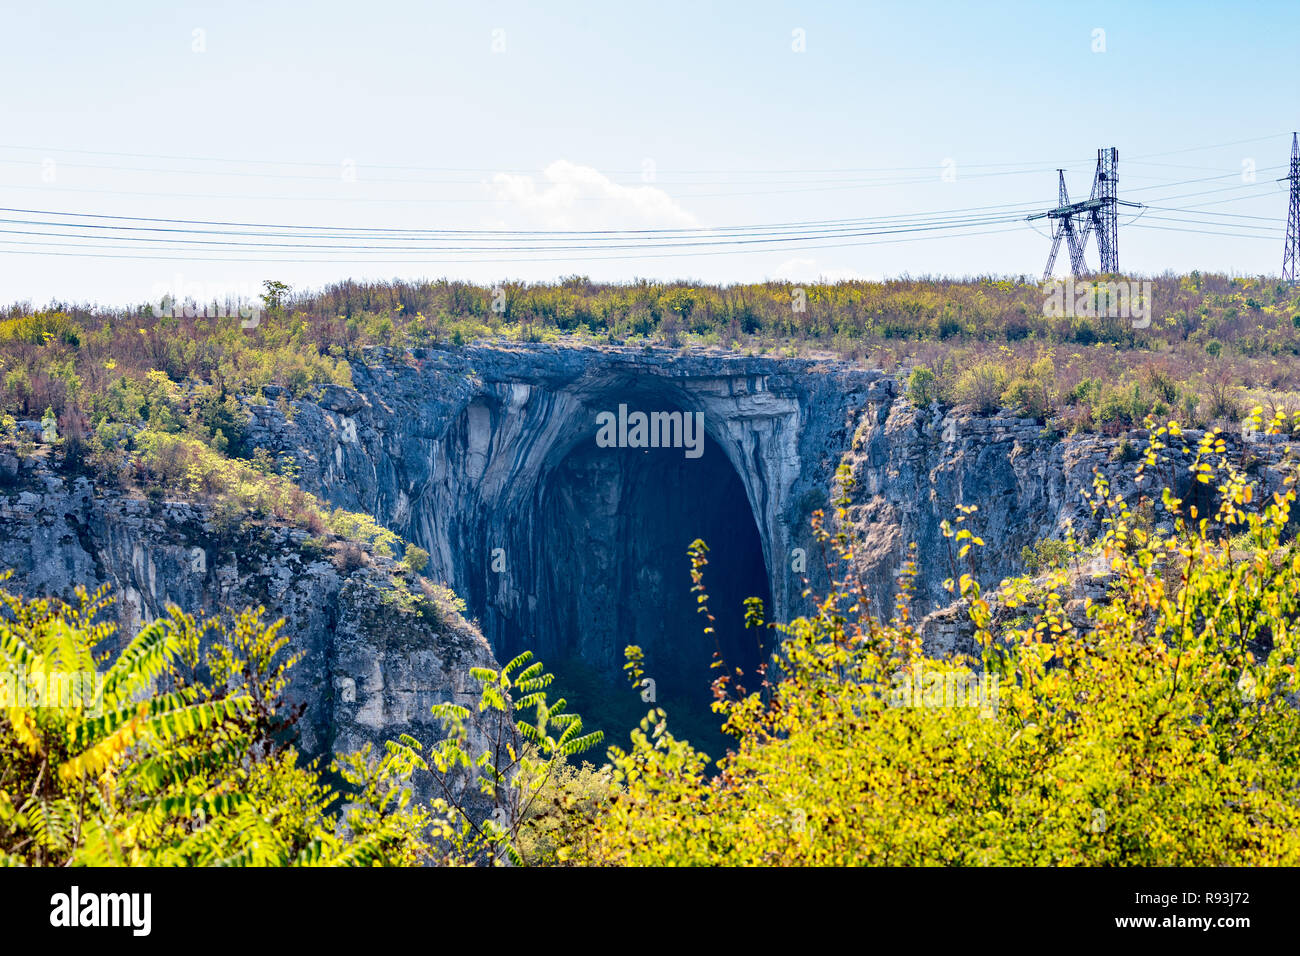 The huge entrance of the Prohodna cave in Northern Bulgaria, electric poles and wires on top, an example of juxtaposition Stock Photo